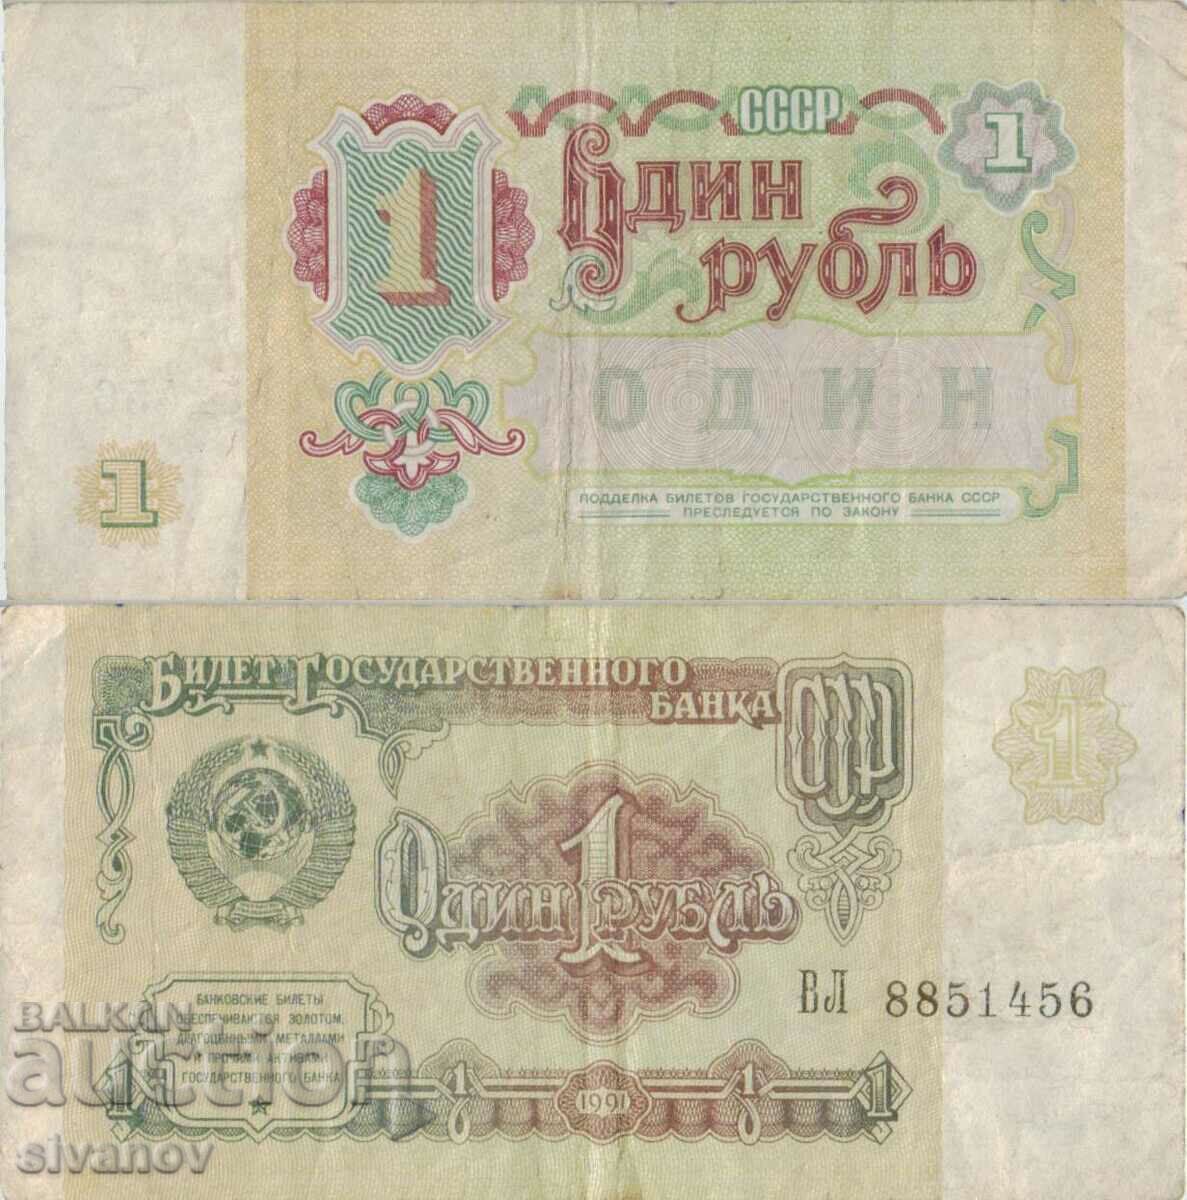 Russia 1 ruble 1991 year #4892